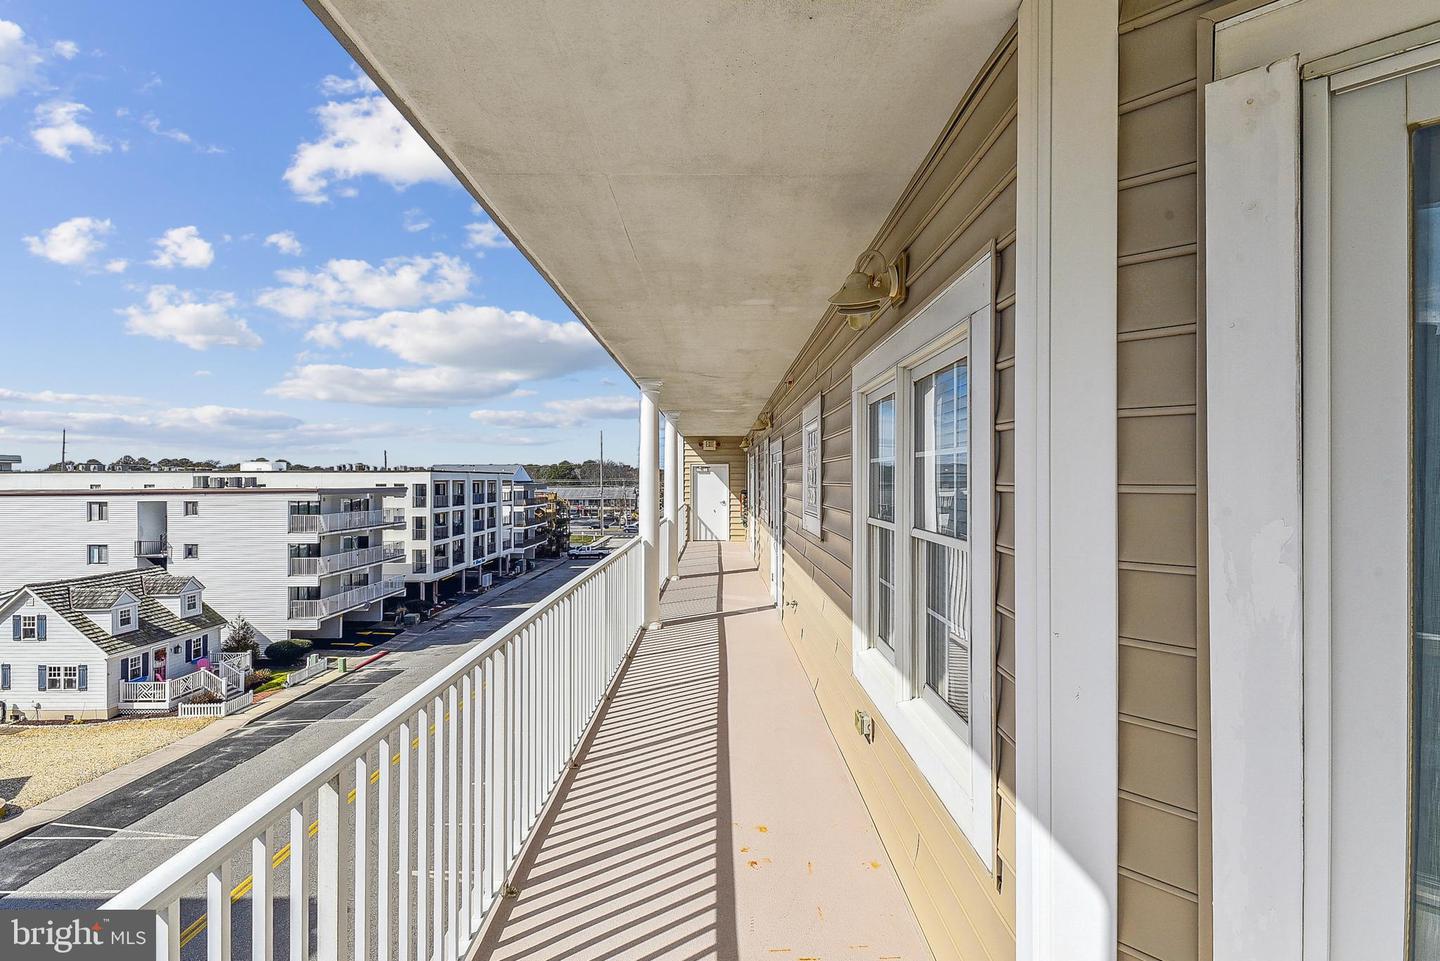 MDWO2019340-802917242564-2024-03-12-11-41-10 14301 Wight St #201 | Ocean City, MD Real Estate For Sale | MLS# Mdwo2019340  - 1st Choice Properties